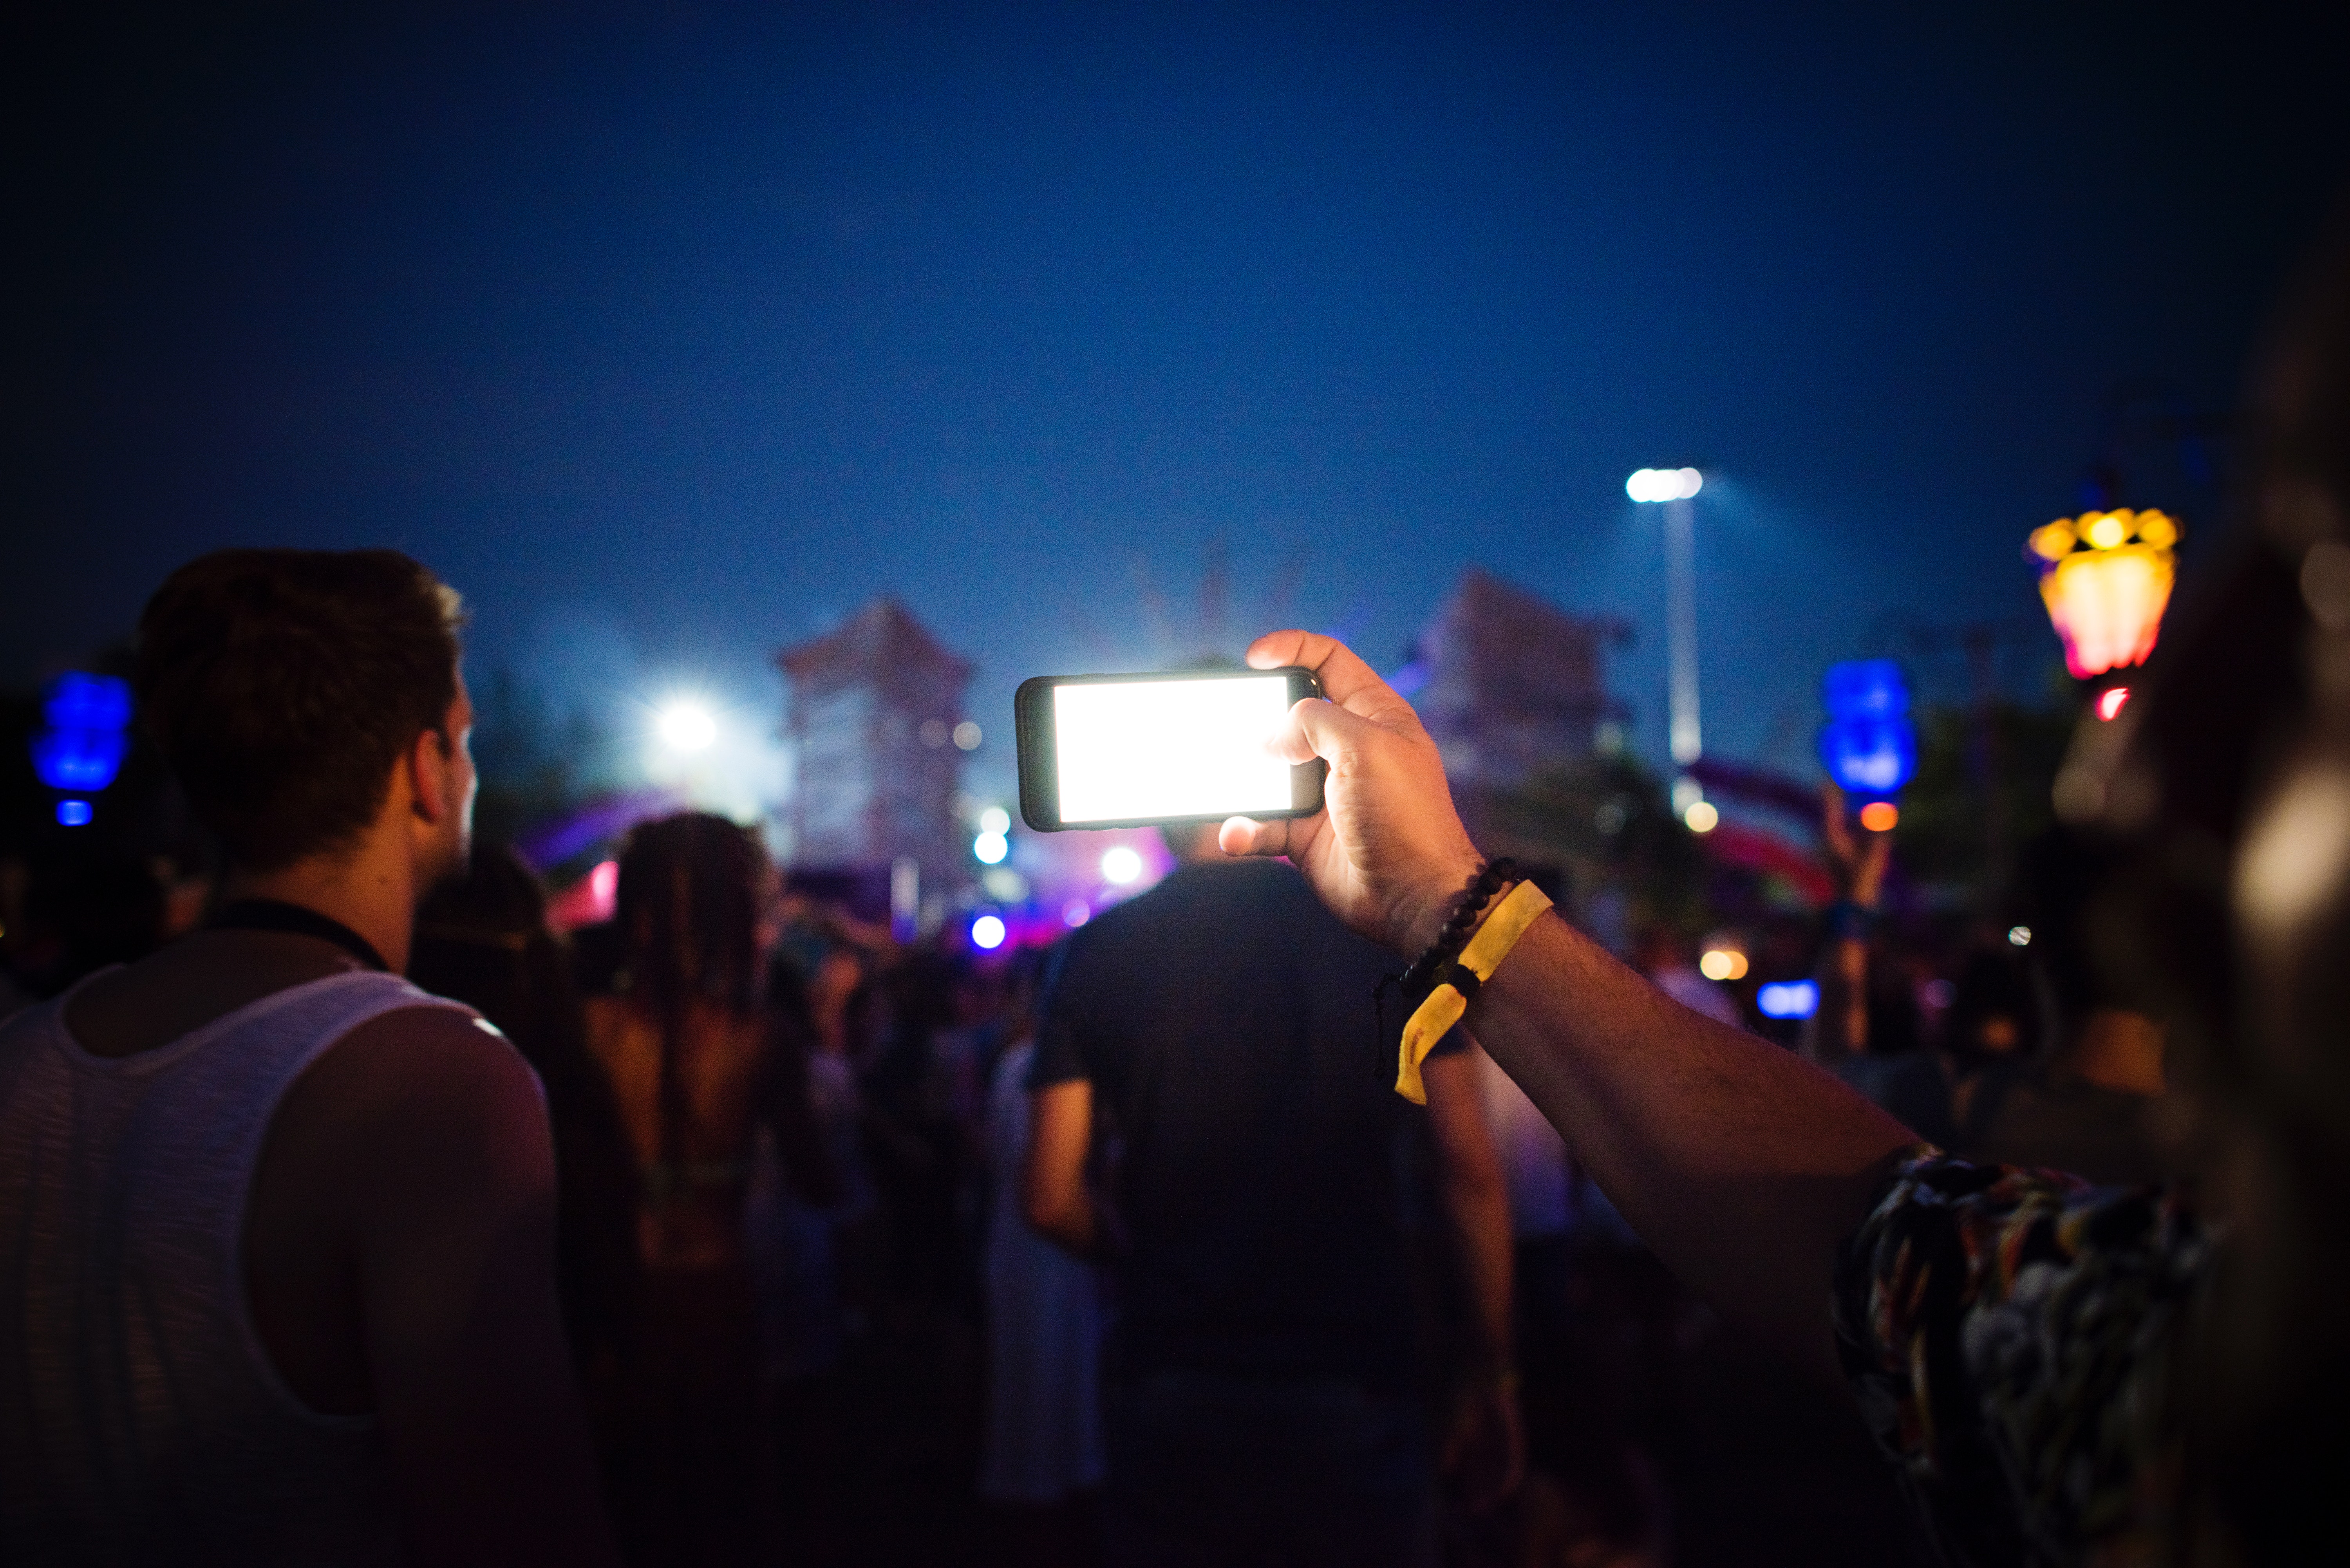 Group of People Using Smartphones during Nighttime, Adults, Hipster, Togetherness, Together, HQ Photo